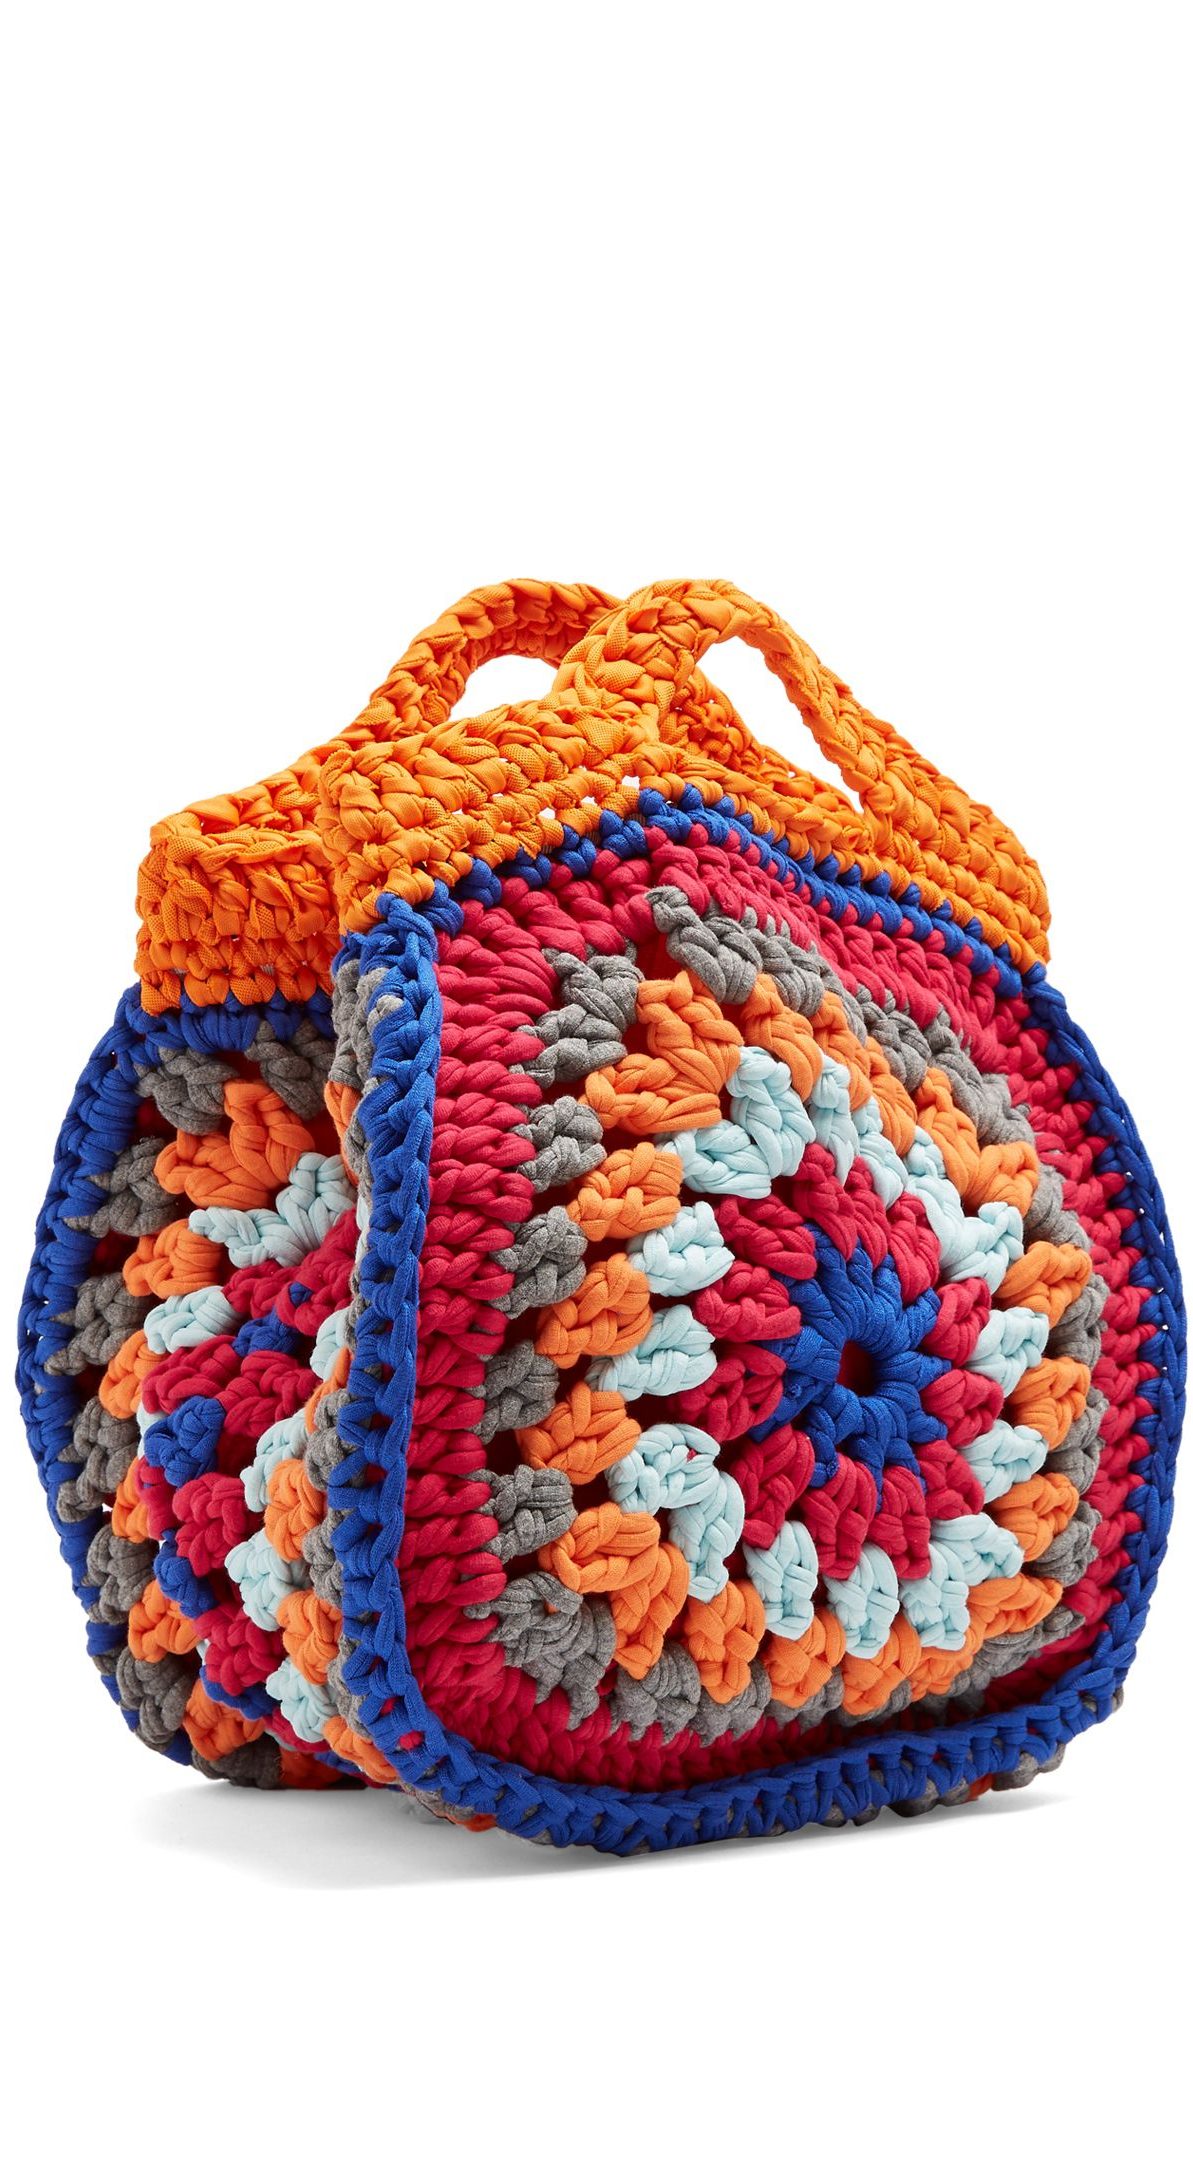 55 Awesome Crochet Bag Pattern Ideas for This Month - Page 16 of 55 ...